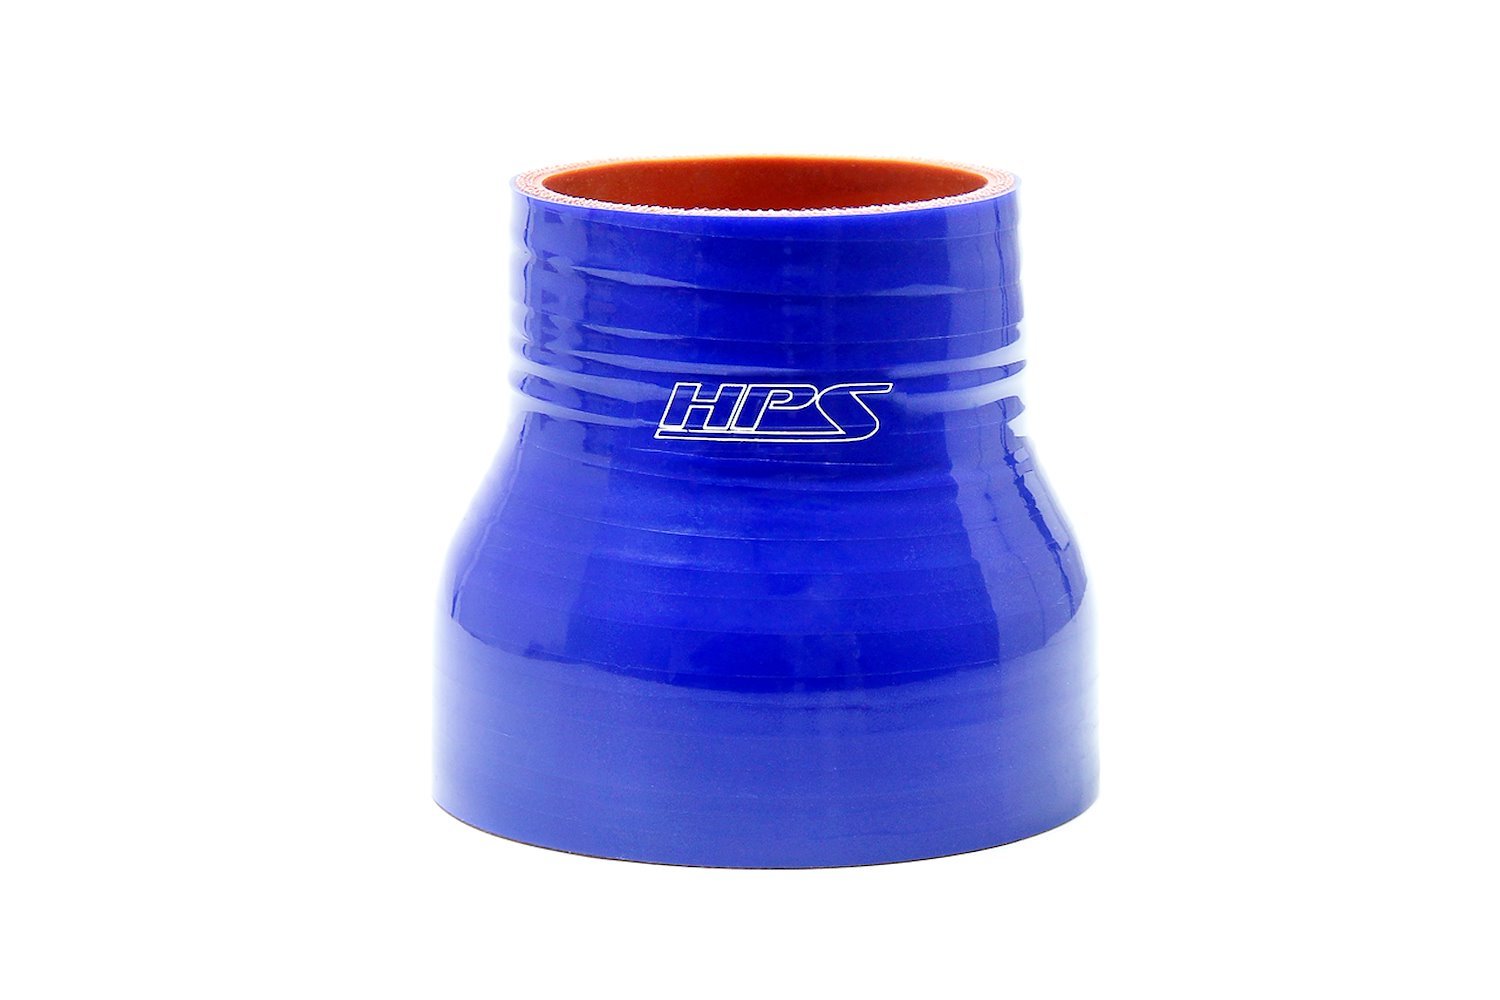 HTSR-187-250-BLUE Silicone Reducer Hose, High-Temp 4-Ply Reinforced, 1-7/8 in. - 2-1/2 in. ID, 3 in. Long, Blue